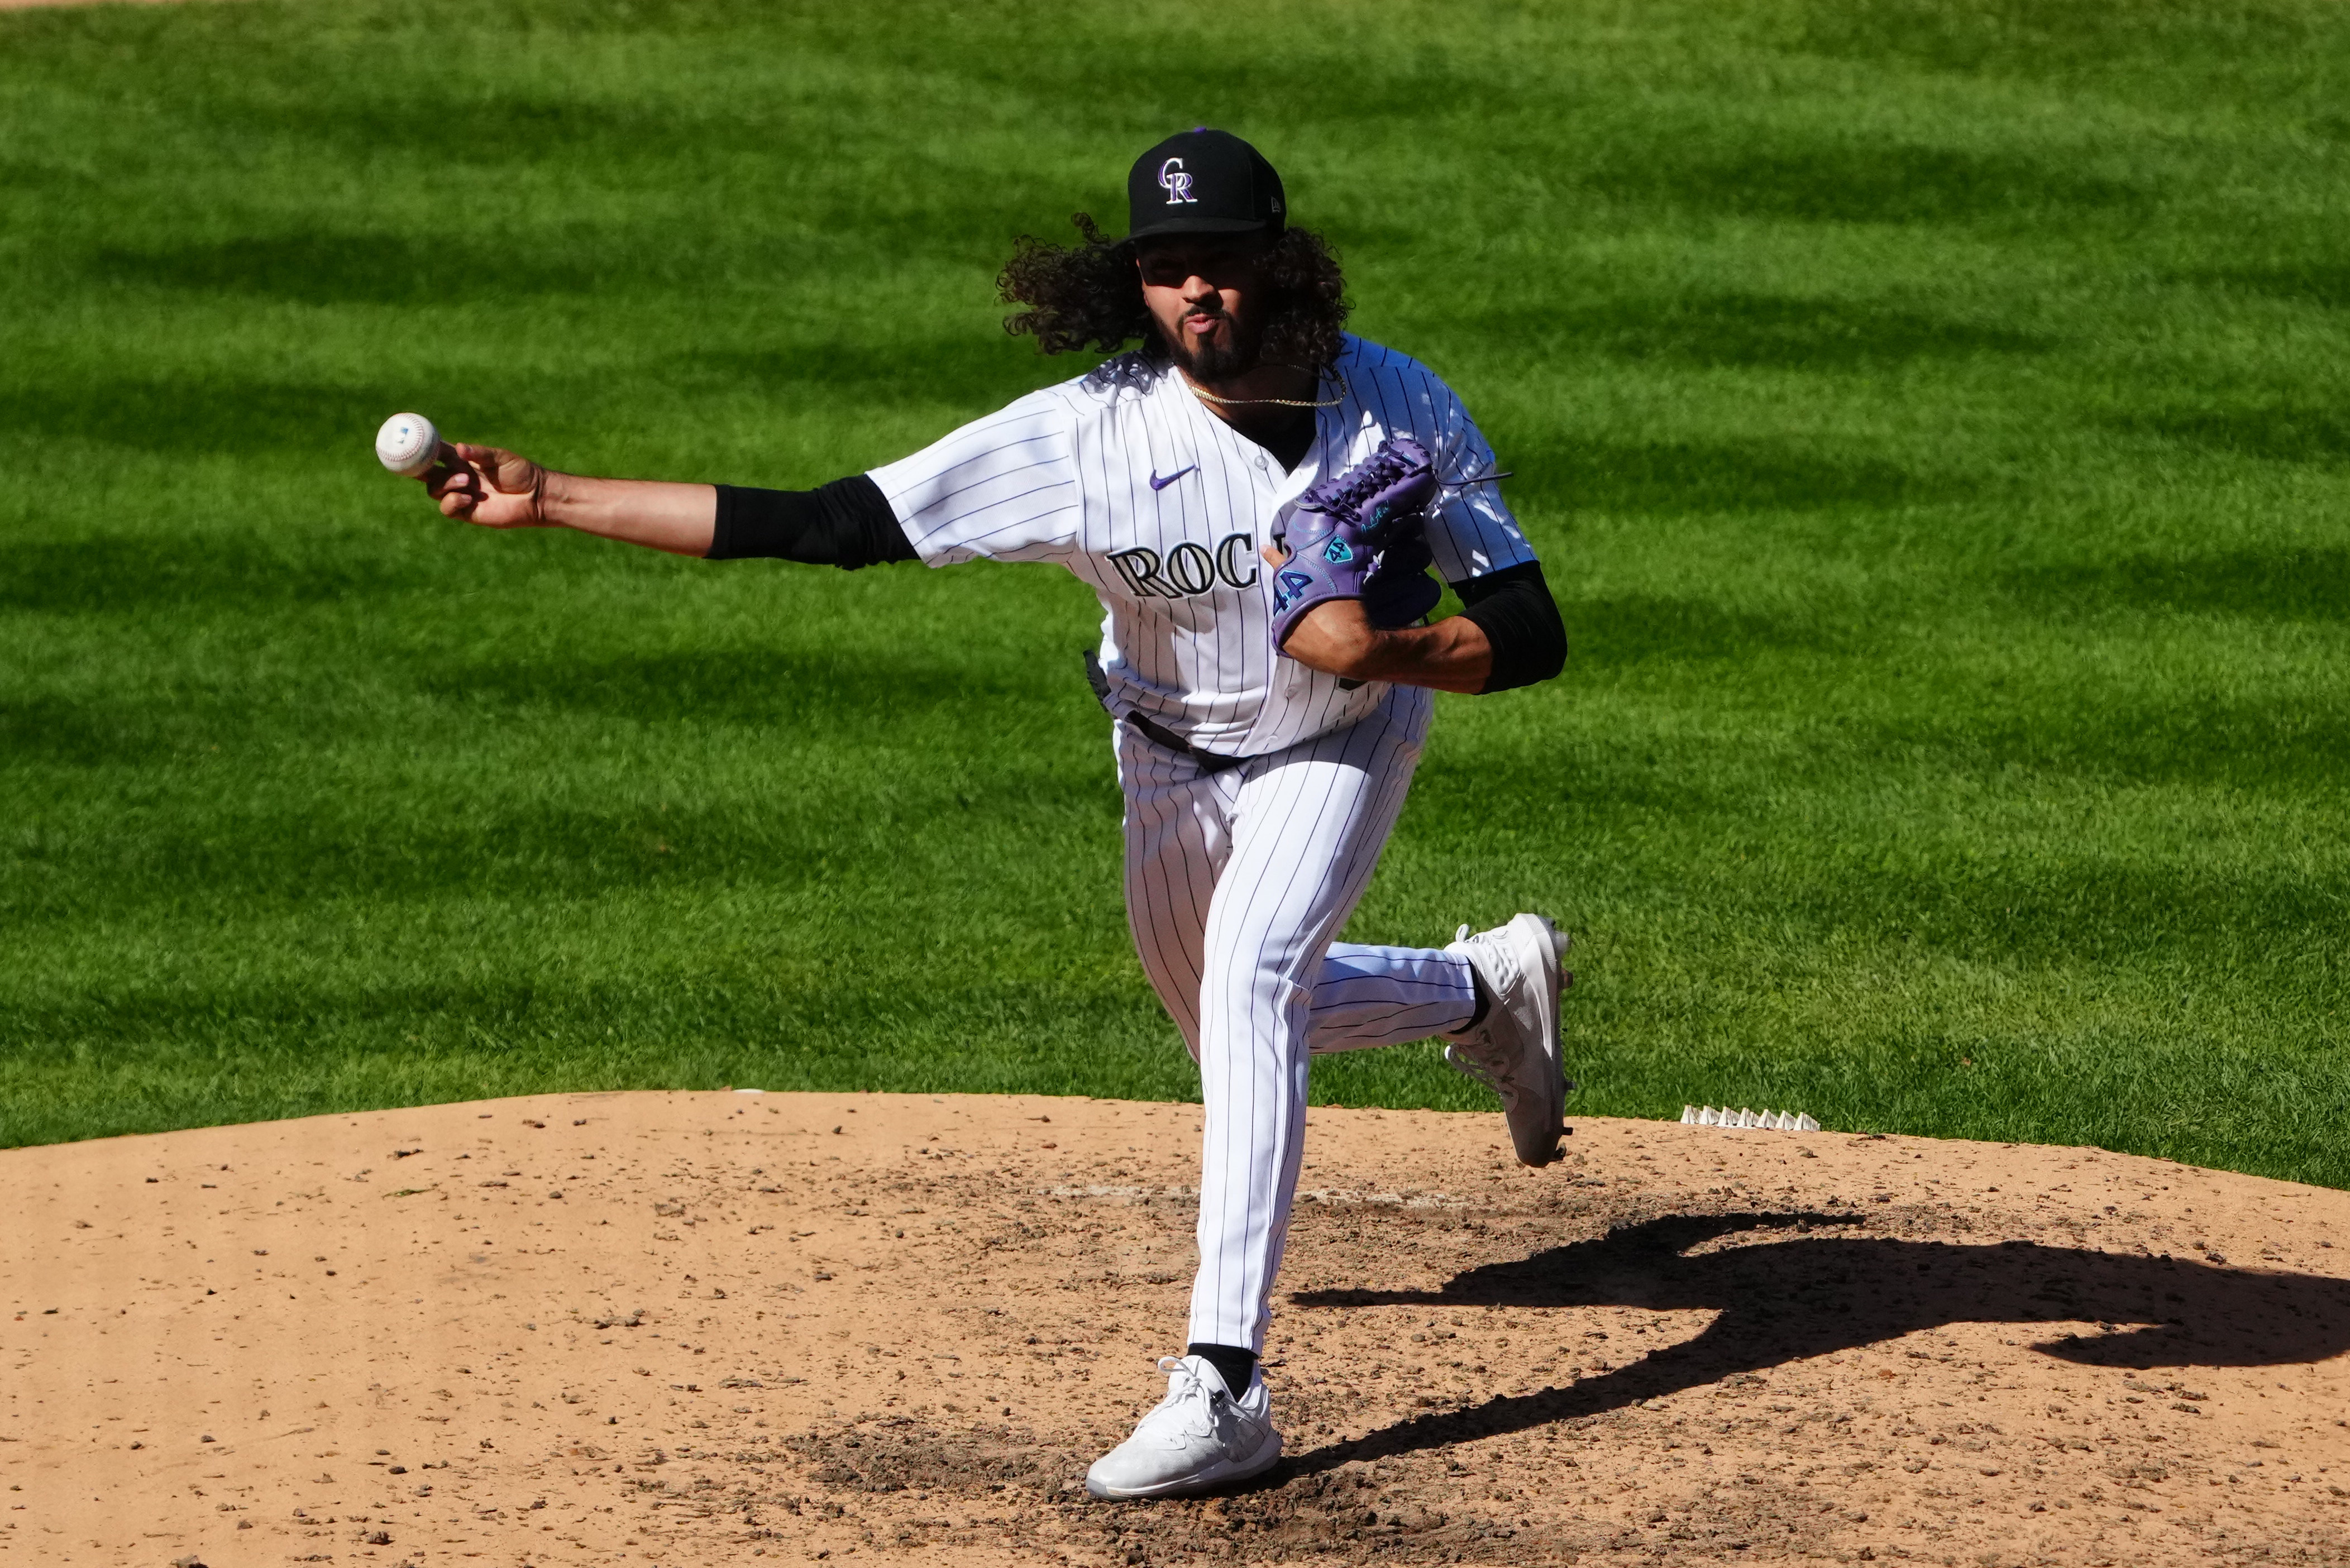 Doyle scores on wild pitch in 11th, Rockies beat Twins